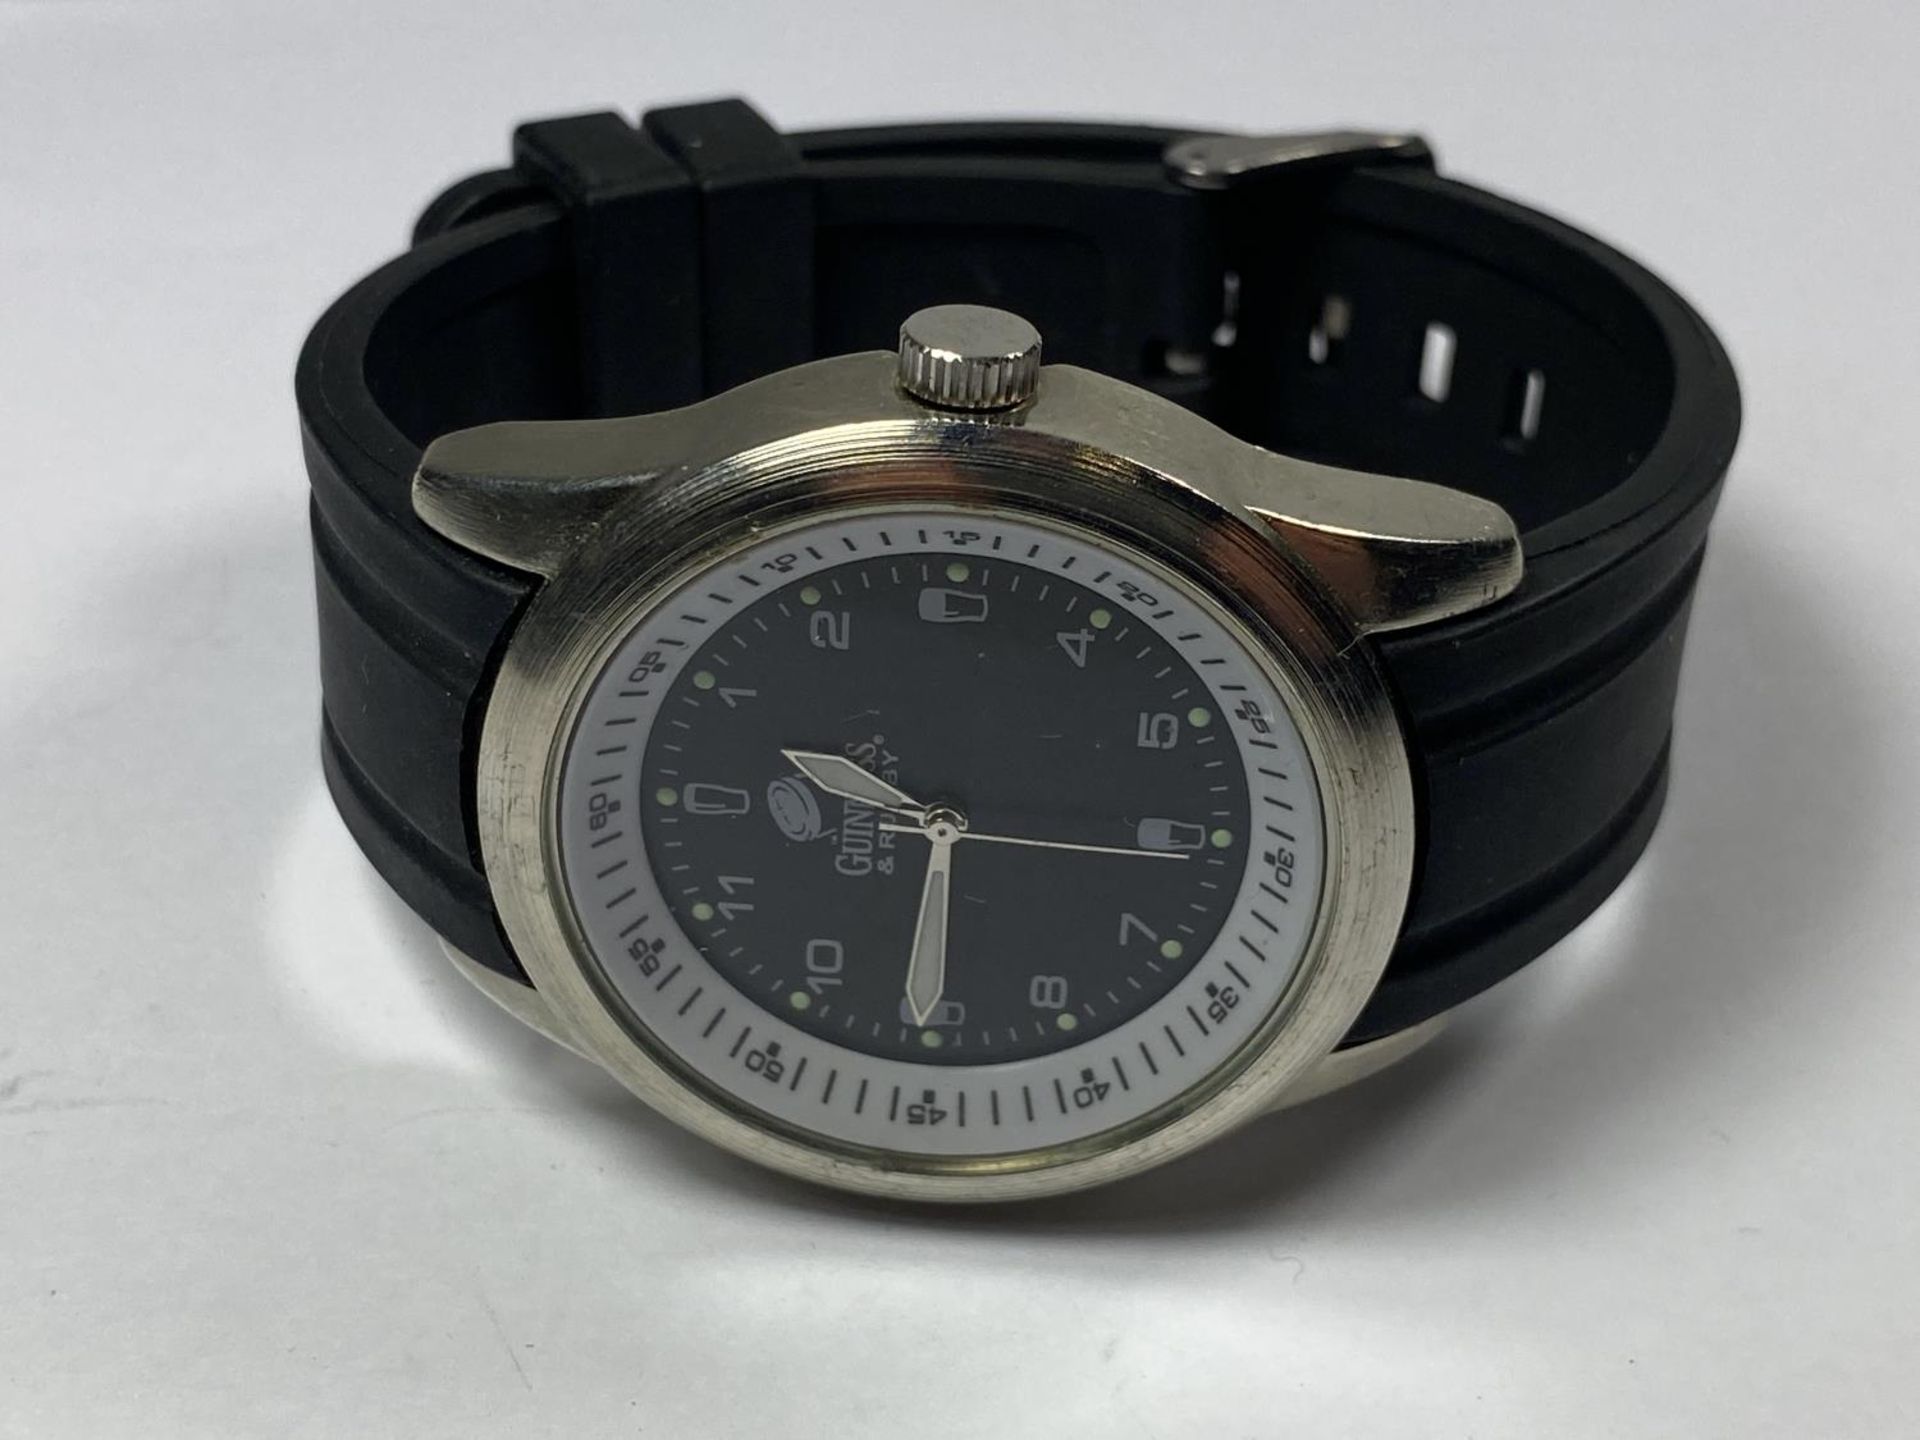 A GUINNESS WRIST WATCH - Image 2 of 4